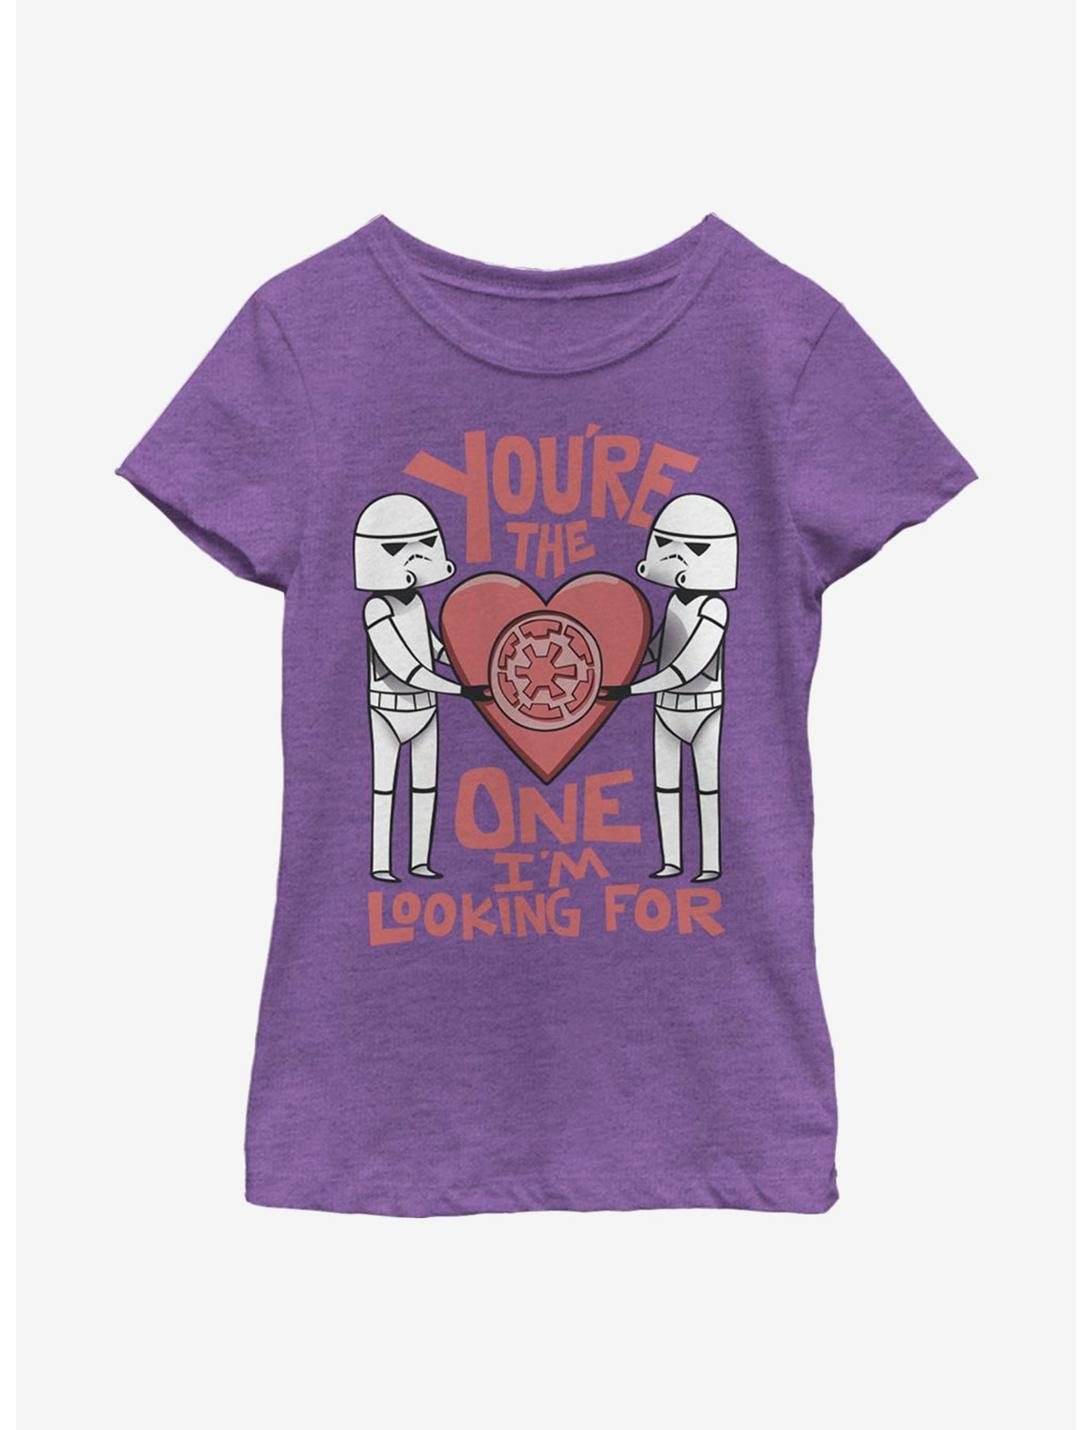 Star Wars Droid Looking For Youth Girls T-Shirt, PURPLE BERRY, hi-res